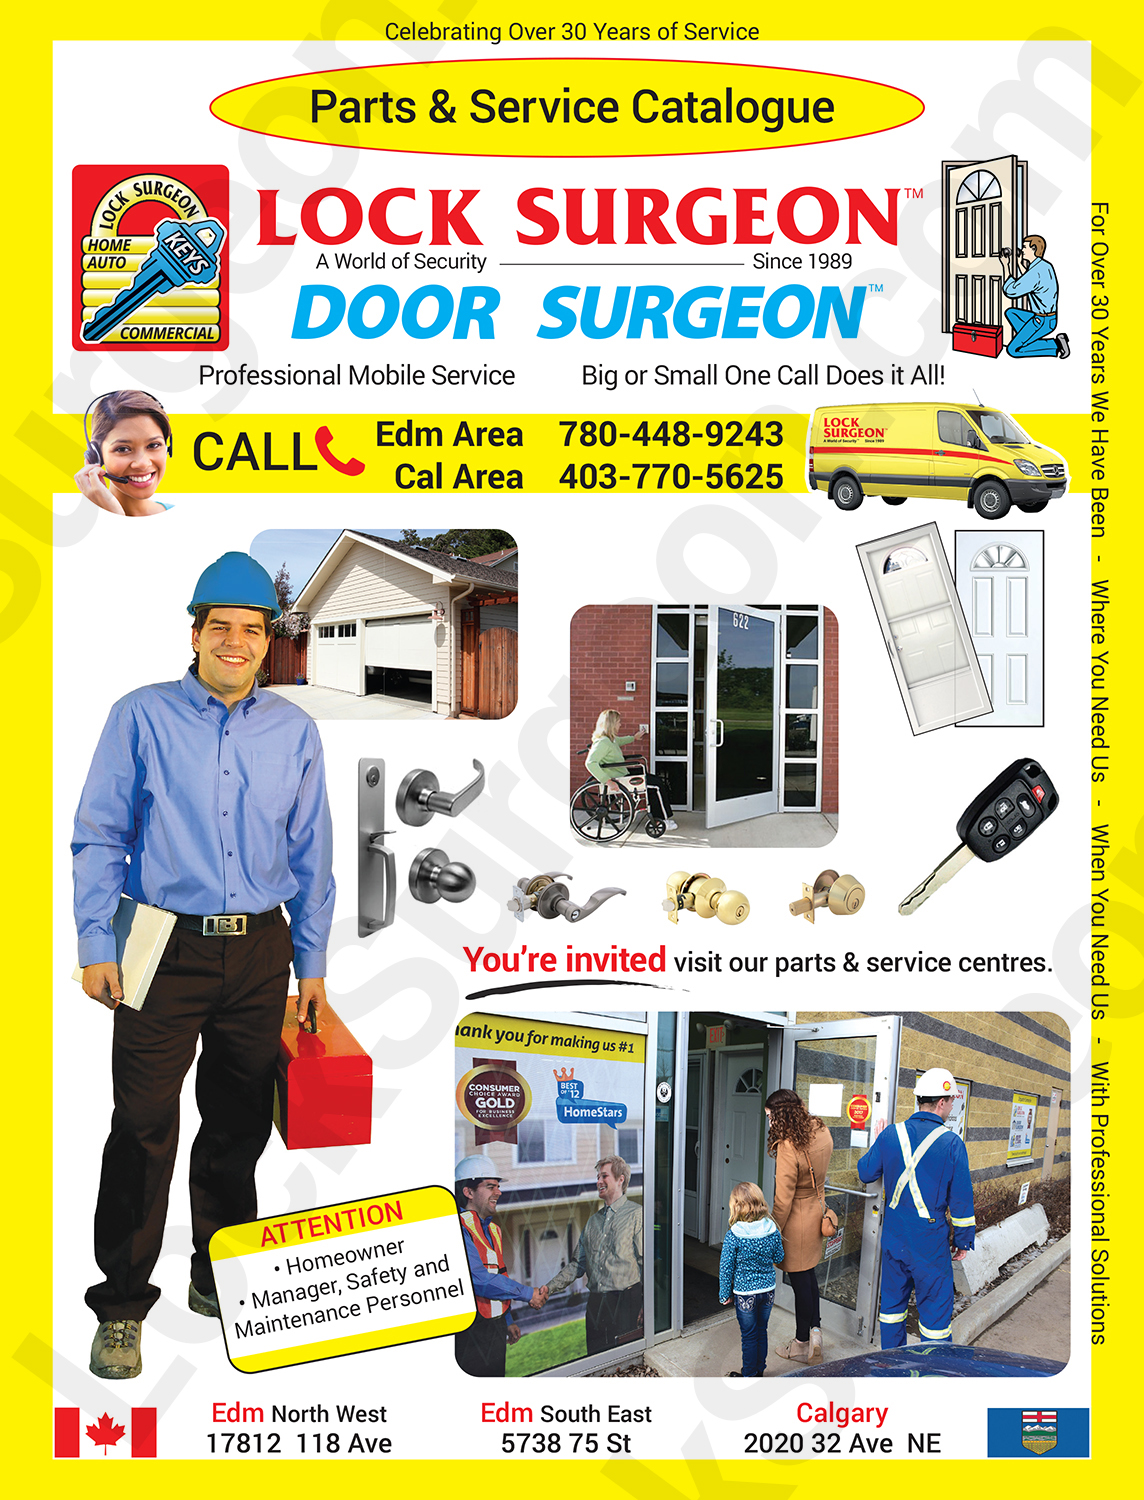 Locksmith services, key cutting, lock repair, security products to meet your needs Acheson.